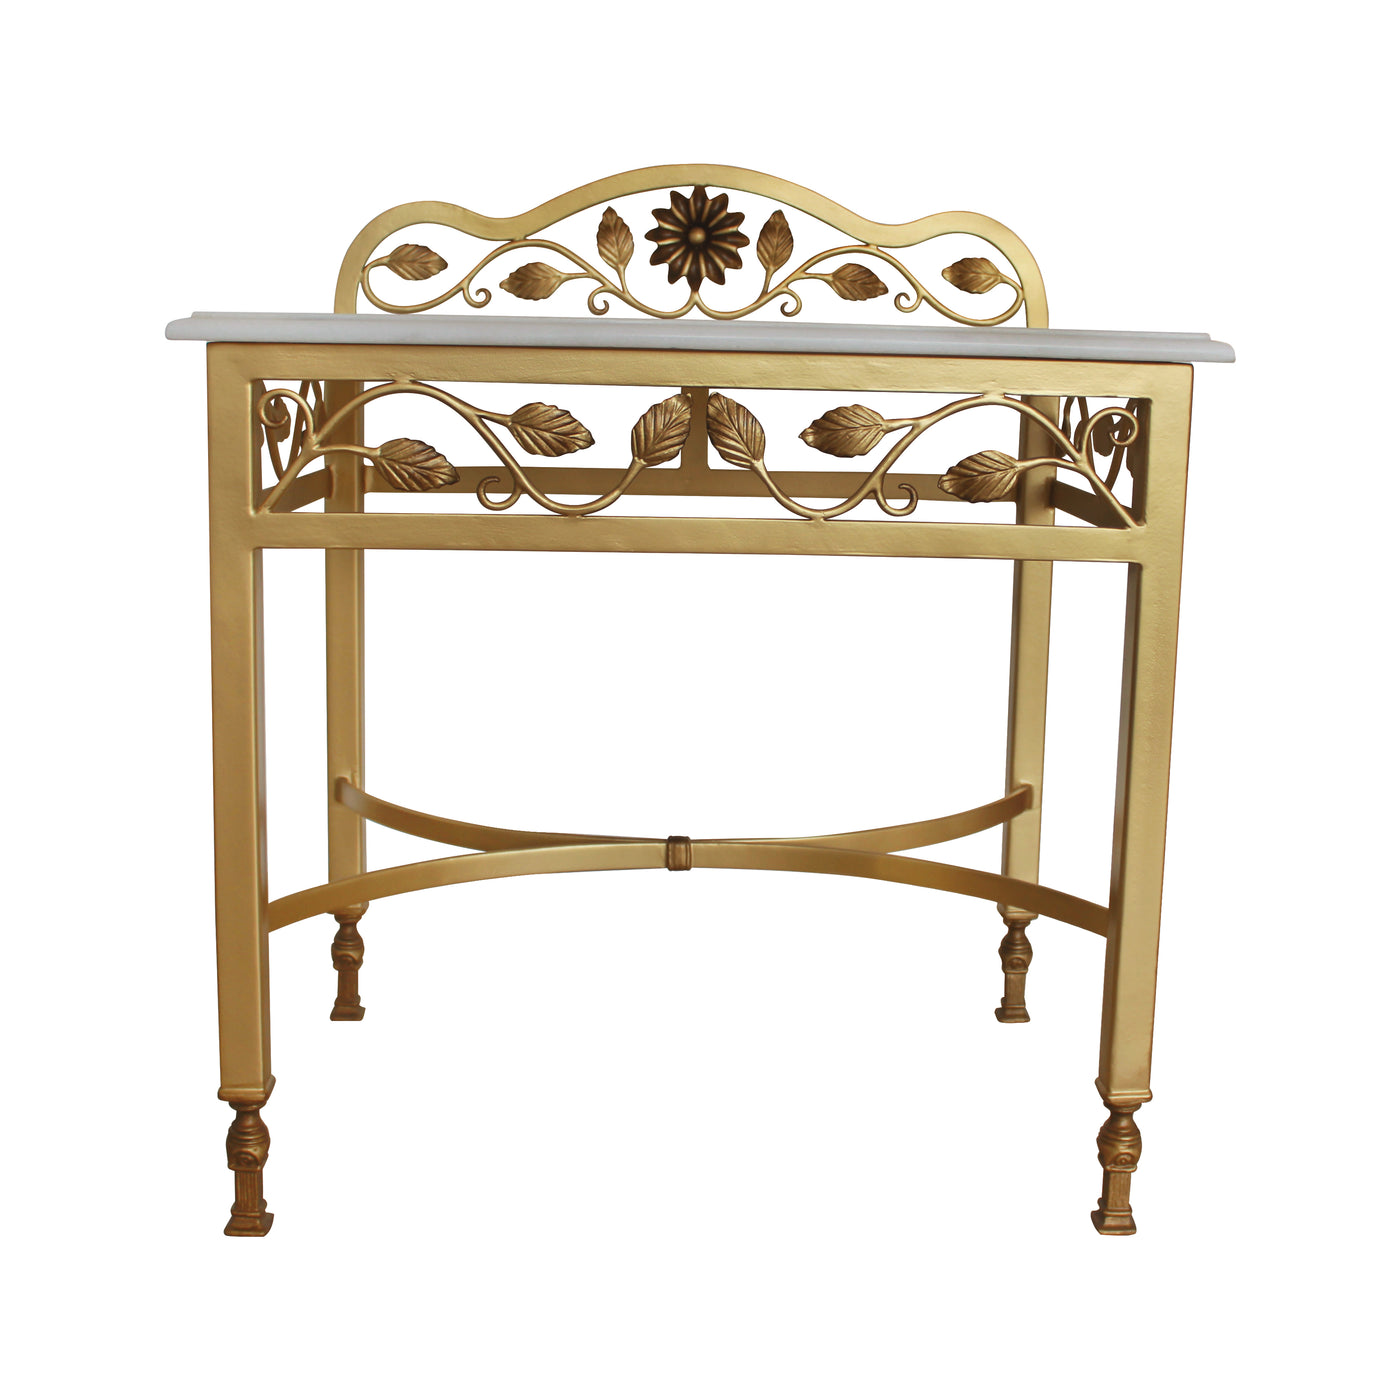 Metal night table painted in antique gold and topped with marble